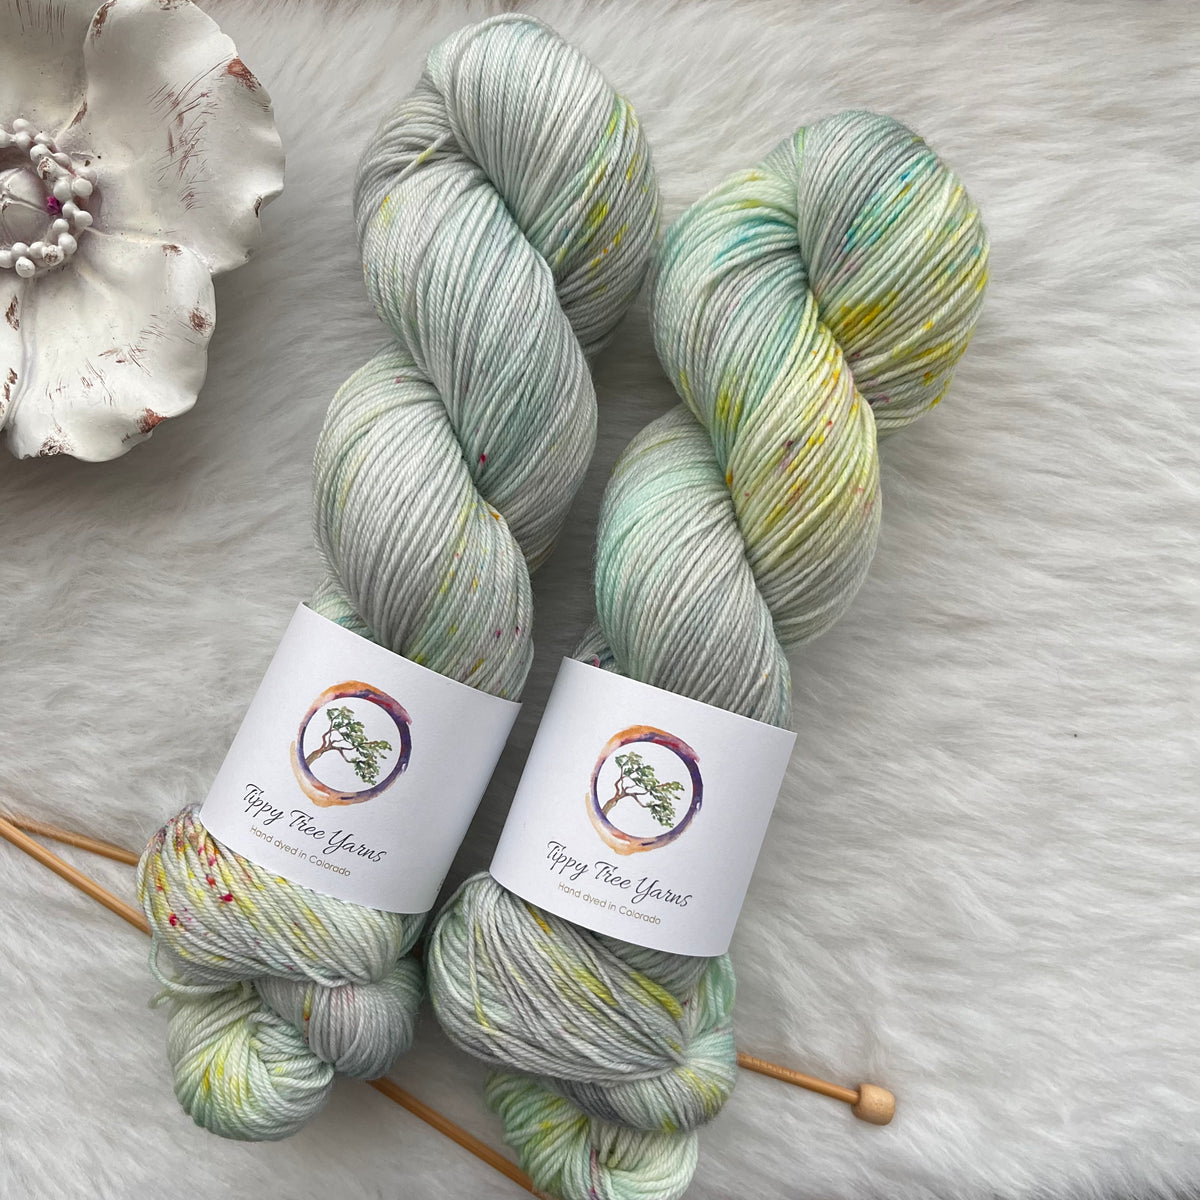 BLOOM FROM WITHIN -Ready to Ship - BFL Sock- Hand Dyed Yarn Skein